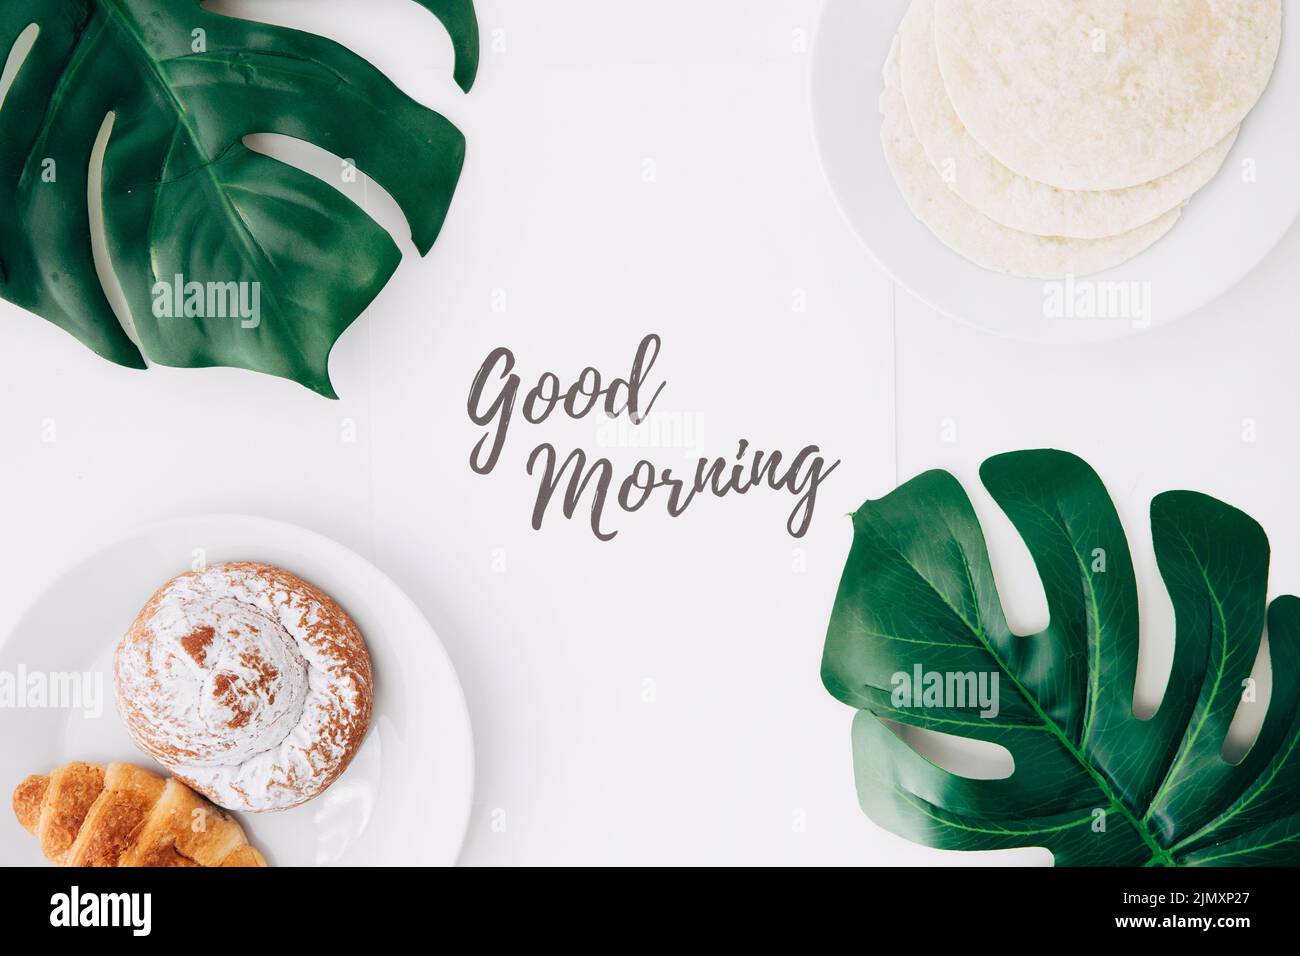 Fresh flour tortillas baked bun croissant breakfast with good morning text paper green monster leaves white background Stock Photo